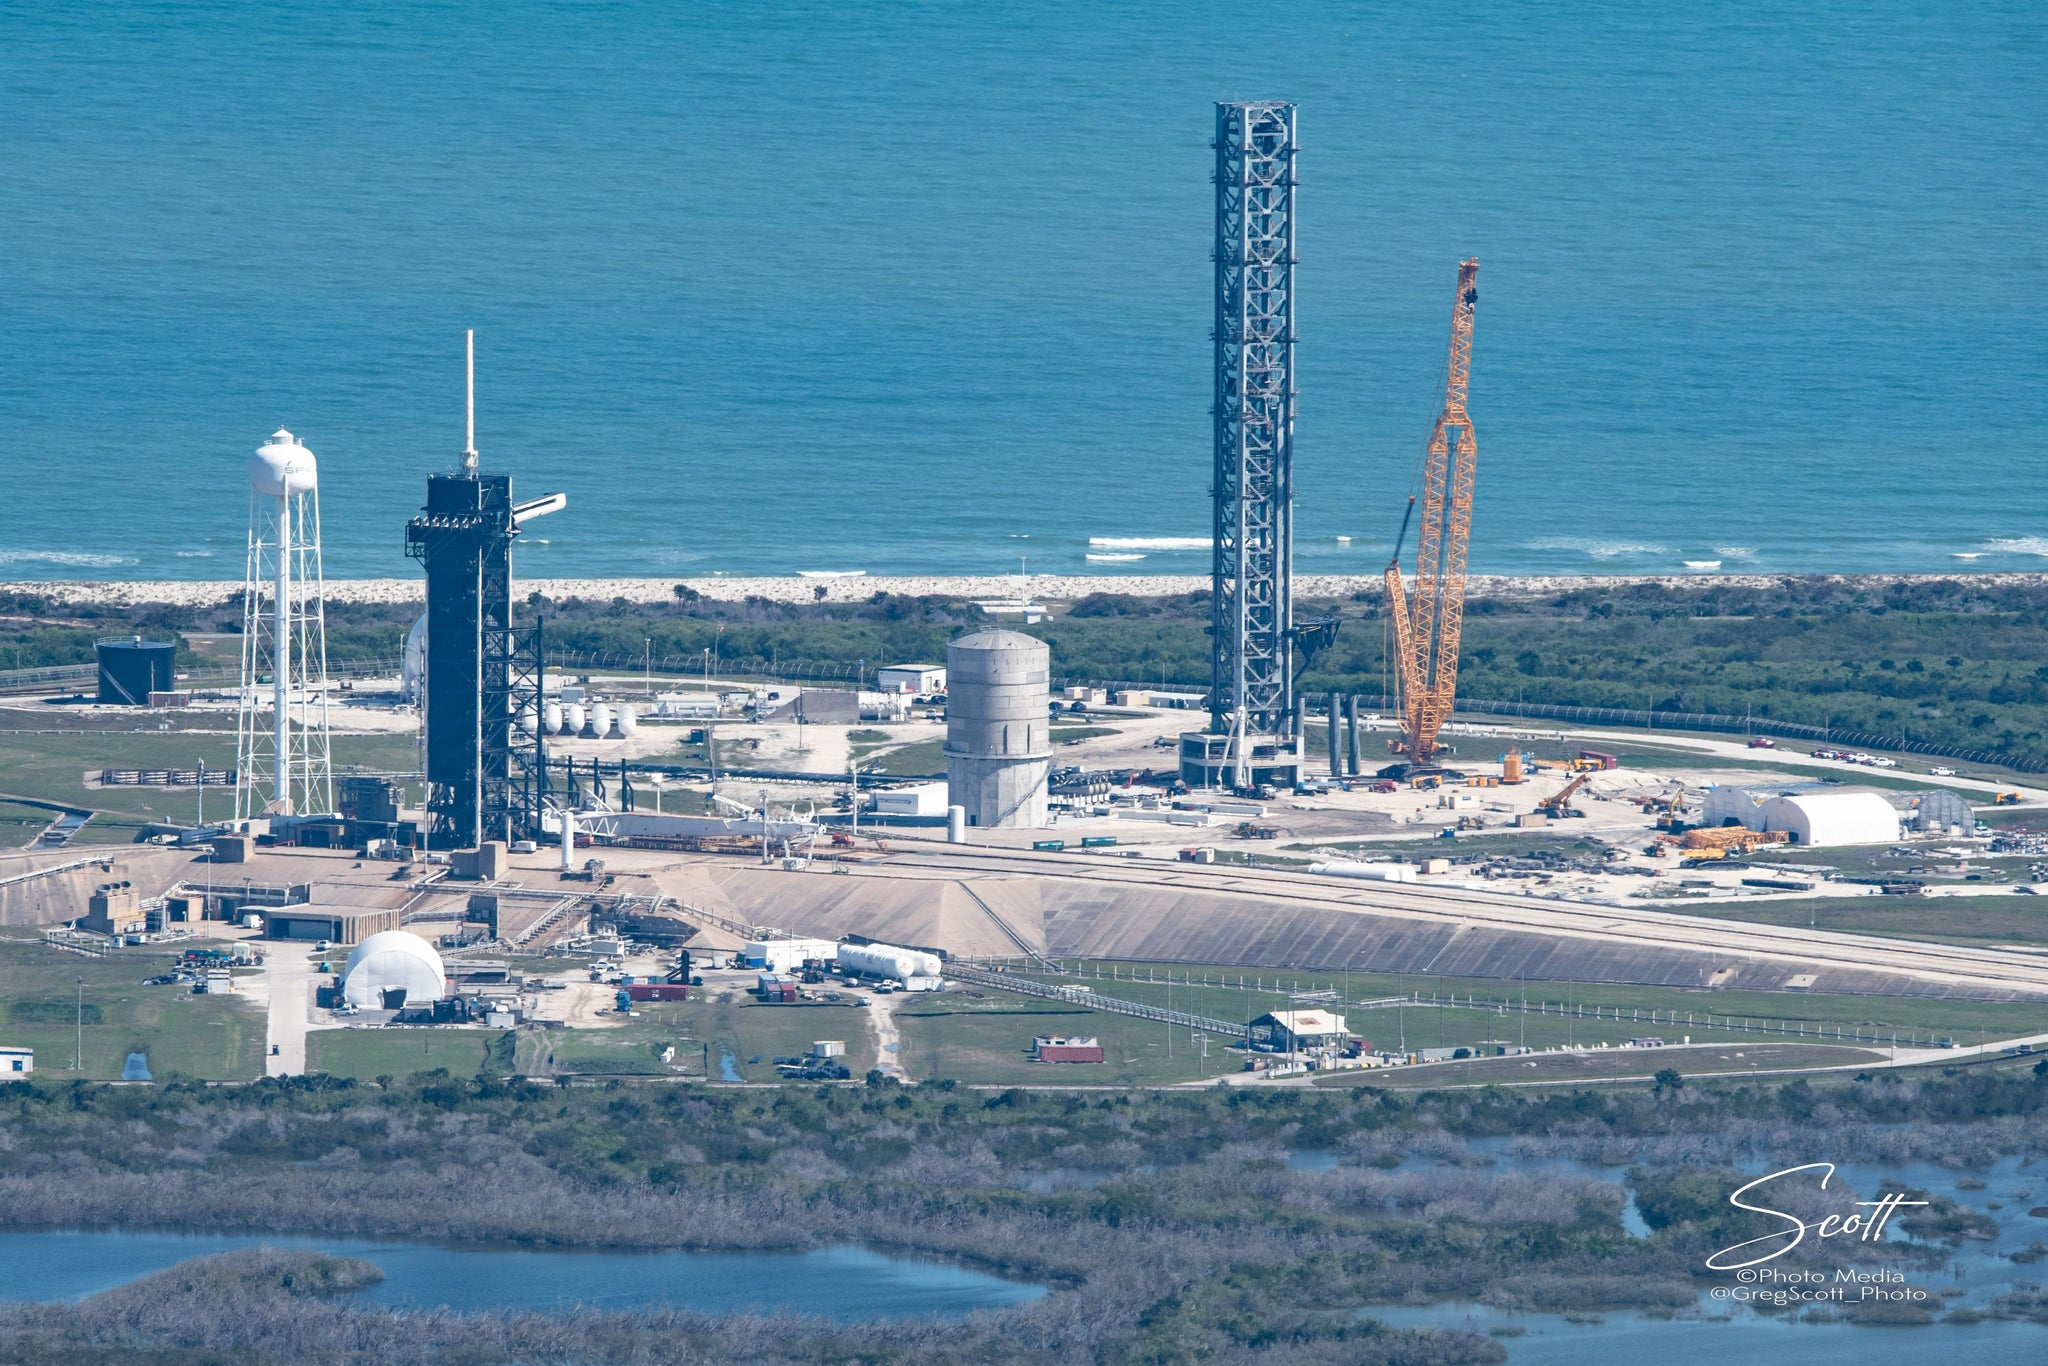 SpaceX installs robotic arms to the Starship launch tower at the NASA Kennedy Space Center in